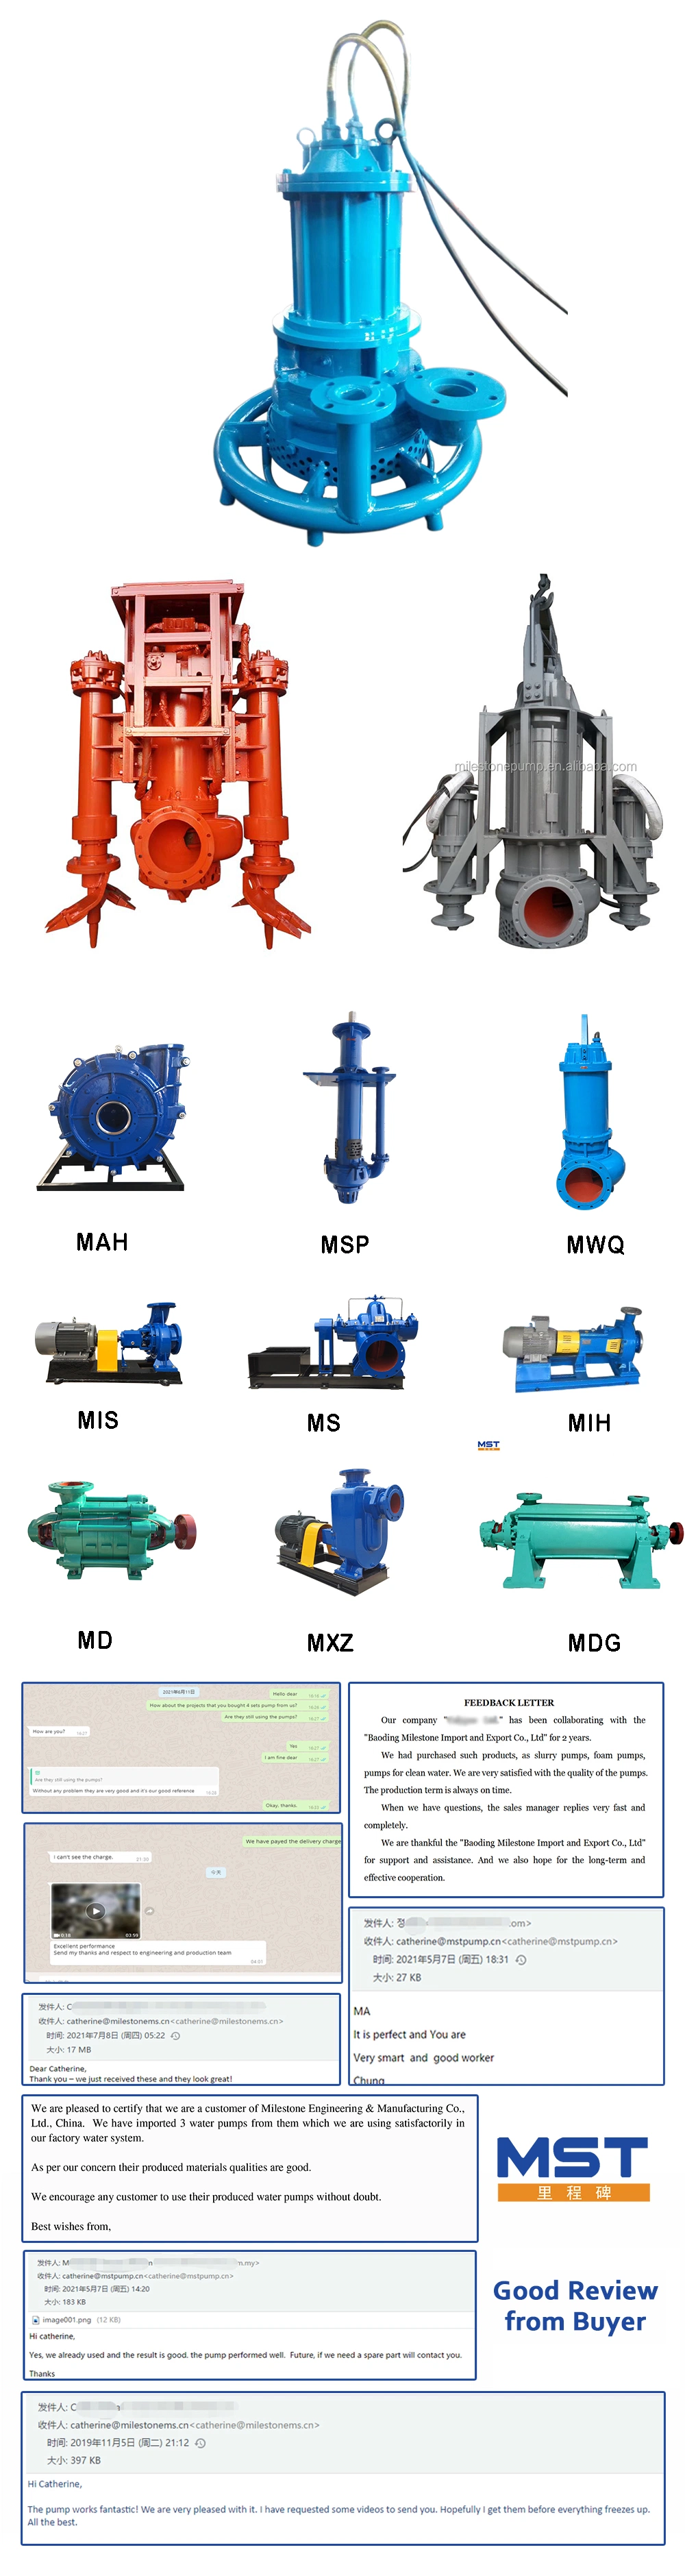 Excavator Industrial Submisable Mining Hydraulic Sand New Slurry Pumps